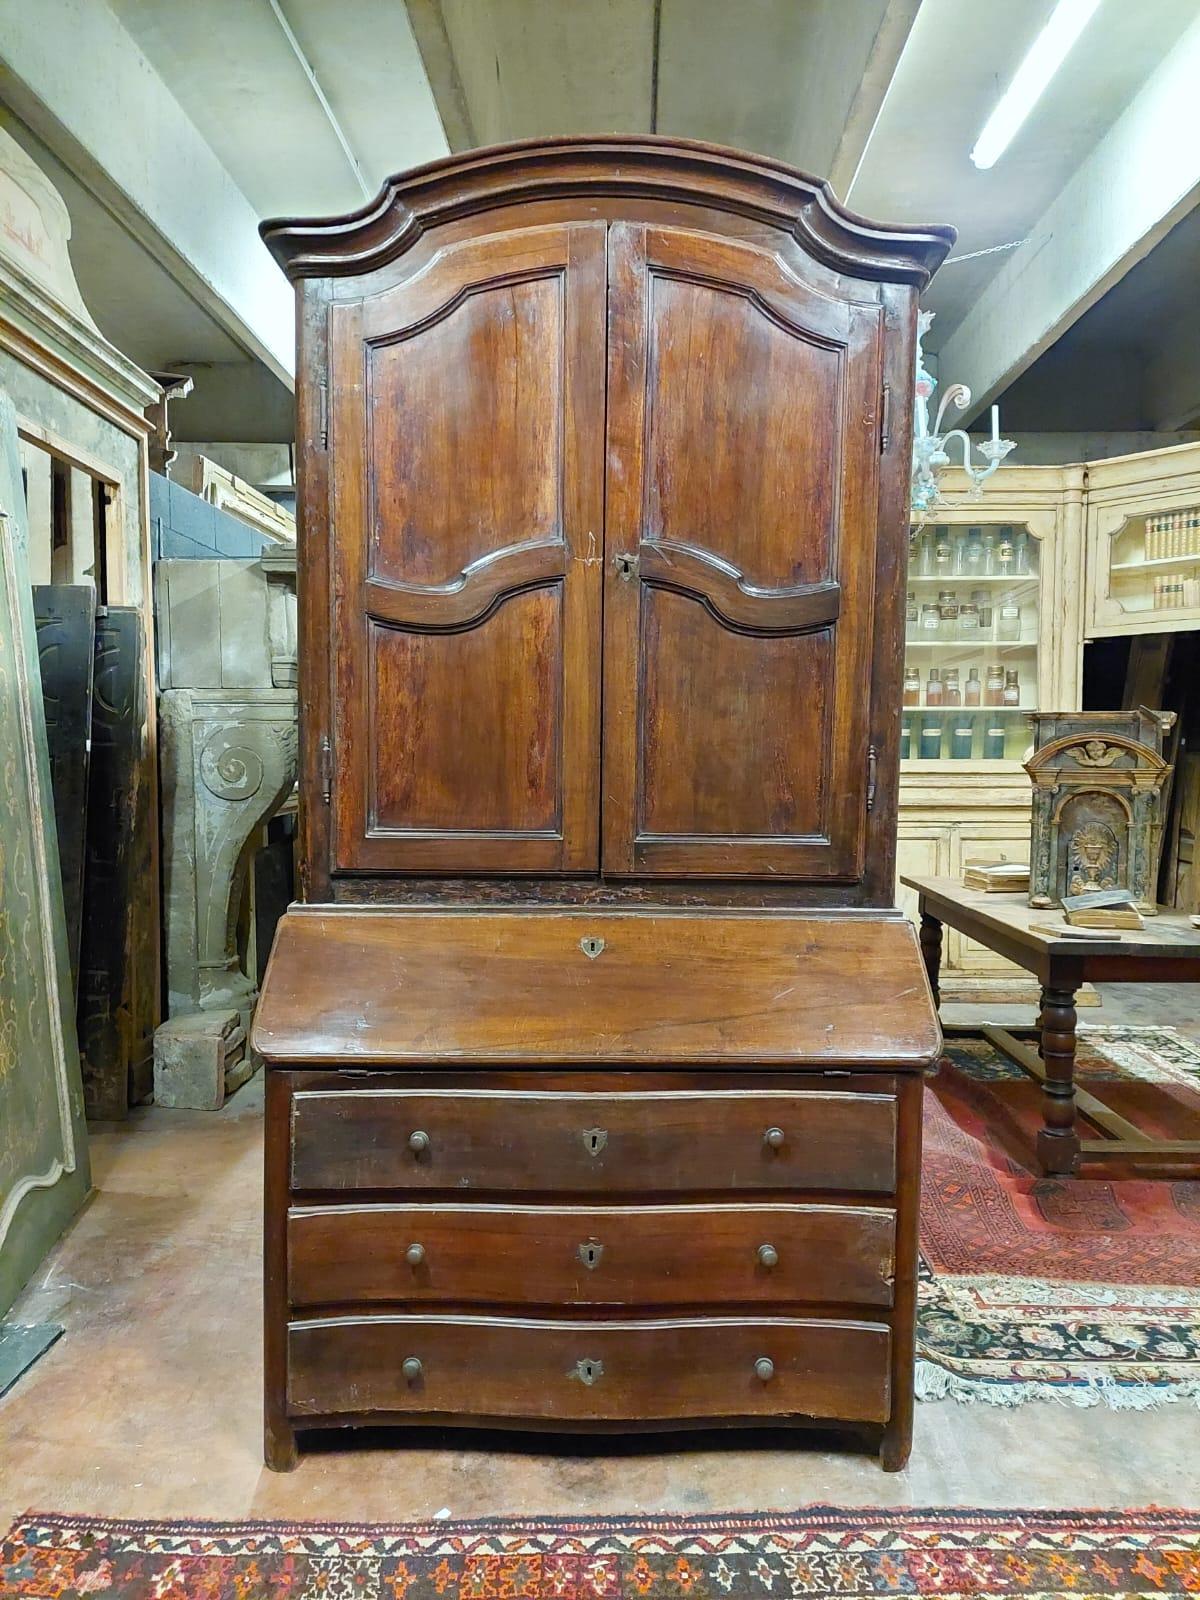 Antique walnut trumeau, with curved and carved doors, complete with internal shelves and moved drawers, built and sculpted entirely by hand by an artisan in the 18th century in Italy, from Piedmont, measuring cm W 126 x H 247 x T max 54.
Very